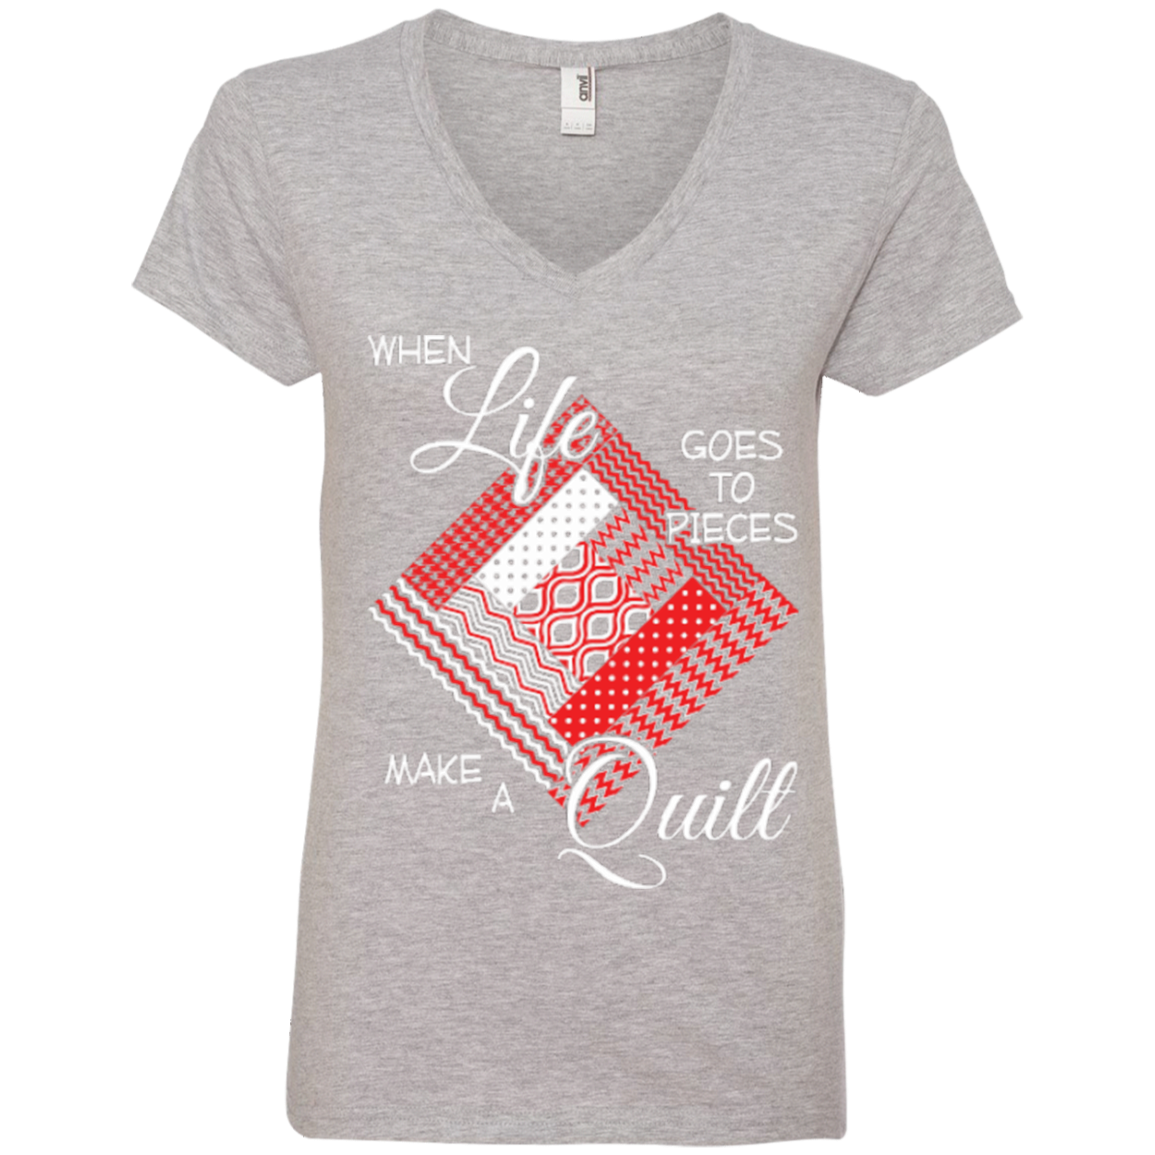 Make a Quilt (red) Ladies V-Neck Tee - Crafter4Life - 2